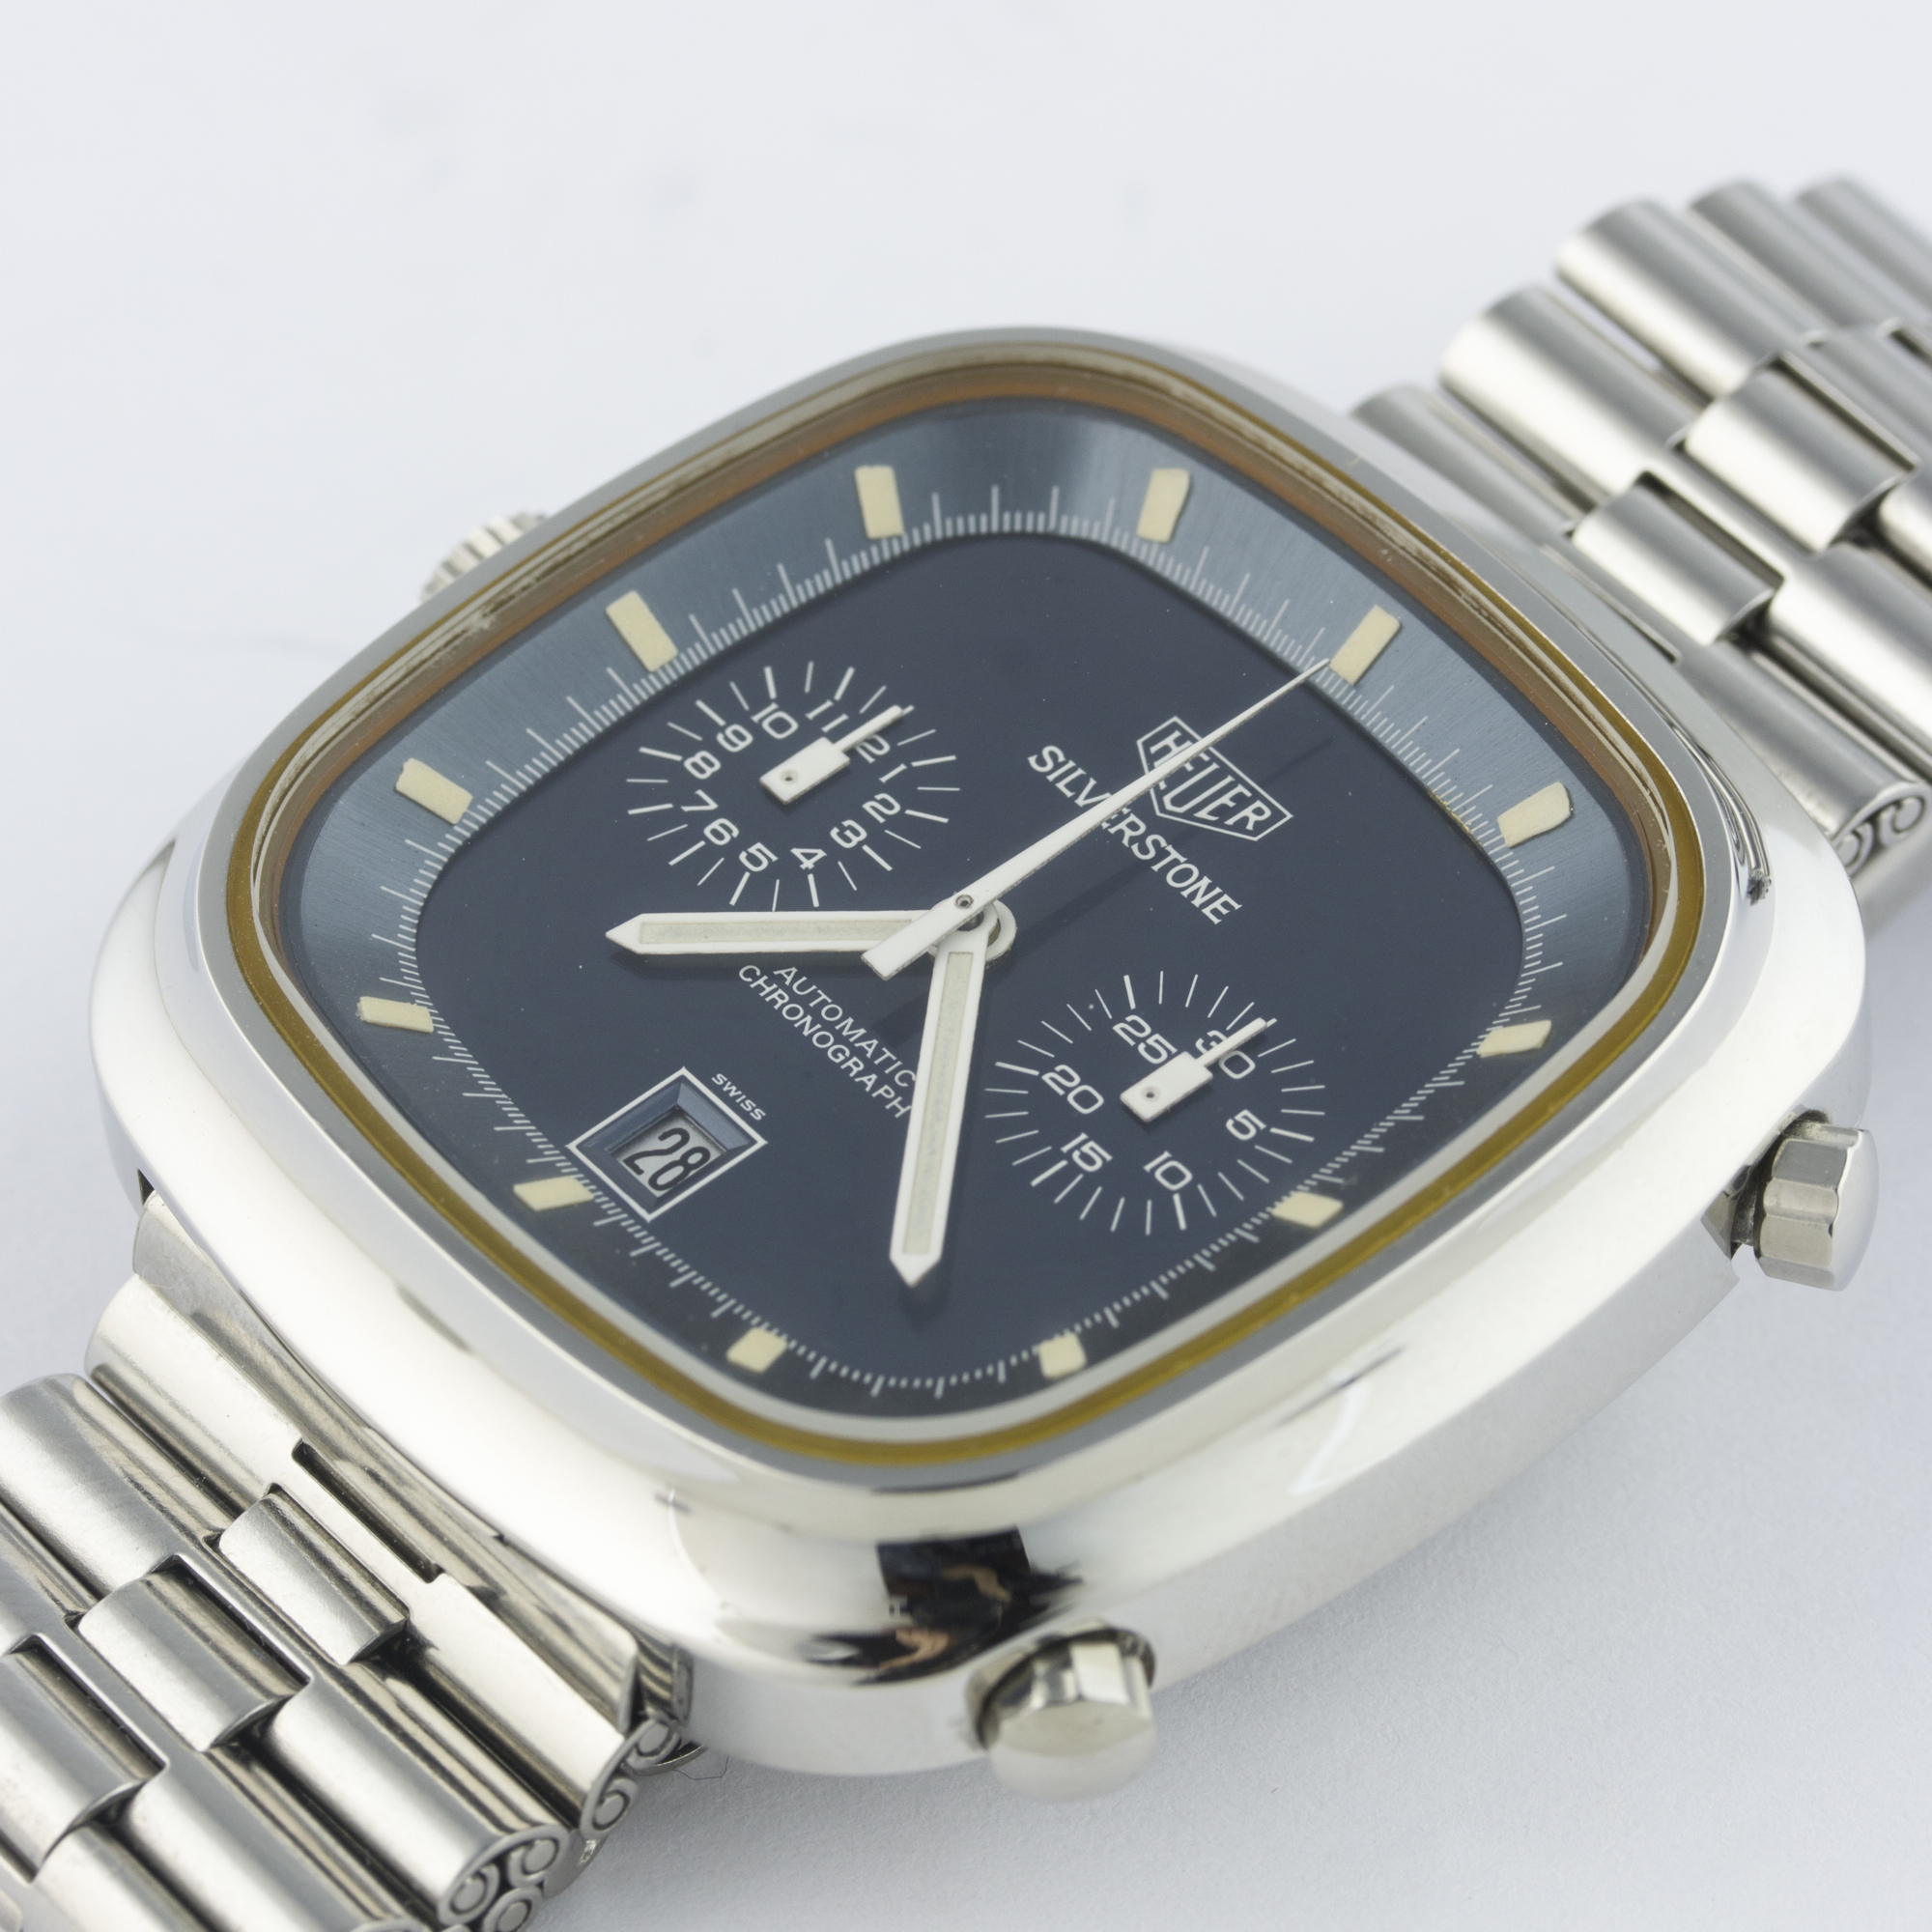 A RARE GENTLEMAN'S STAINLESS STEEL HEUER SILVERSTONE AUTOMATIC CHRONOGRAPH BRACELET WATCH CIRCA - Image 4 of 12